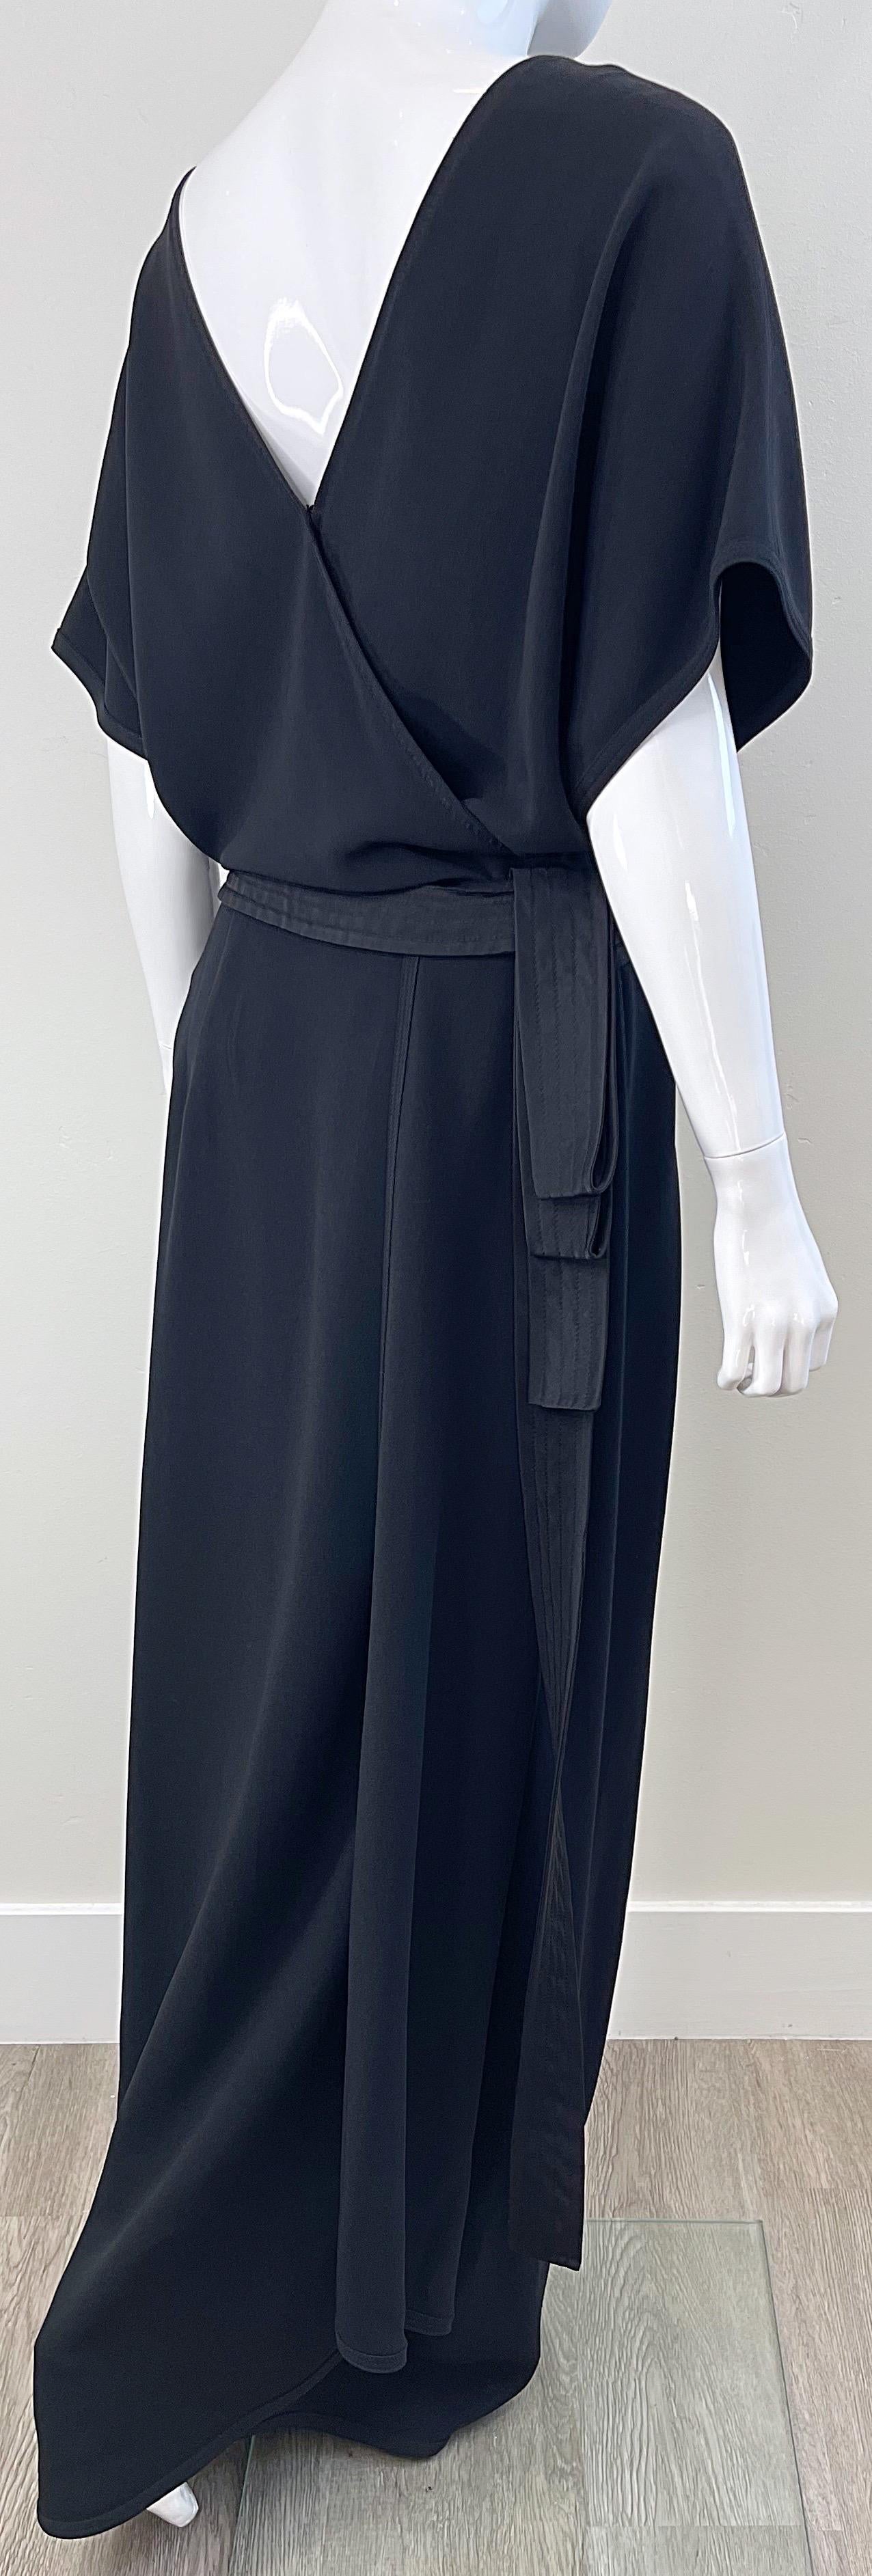 NWT Gianfranco Ferre 2000s Size 44 / 8 - 10 Black Dolman Sleeve Gown Maxi Dress In New Condition For Sale In San Diego, CA